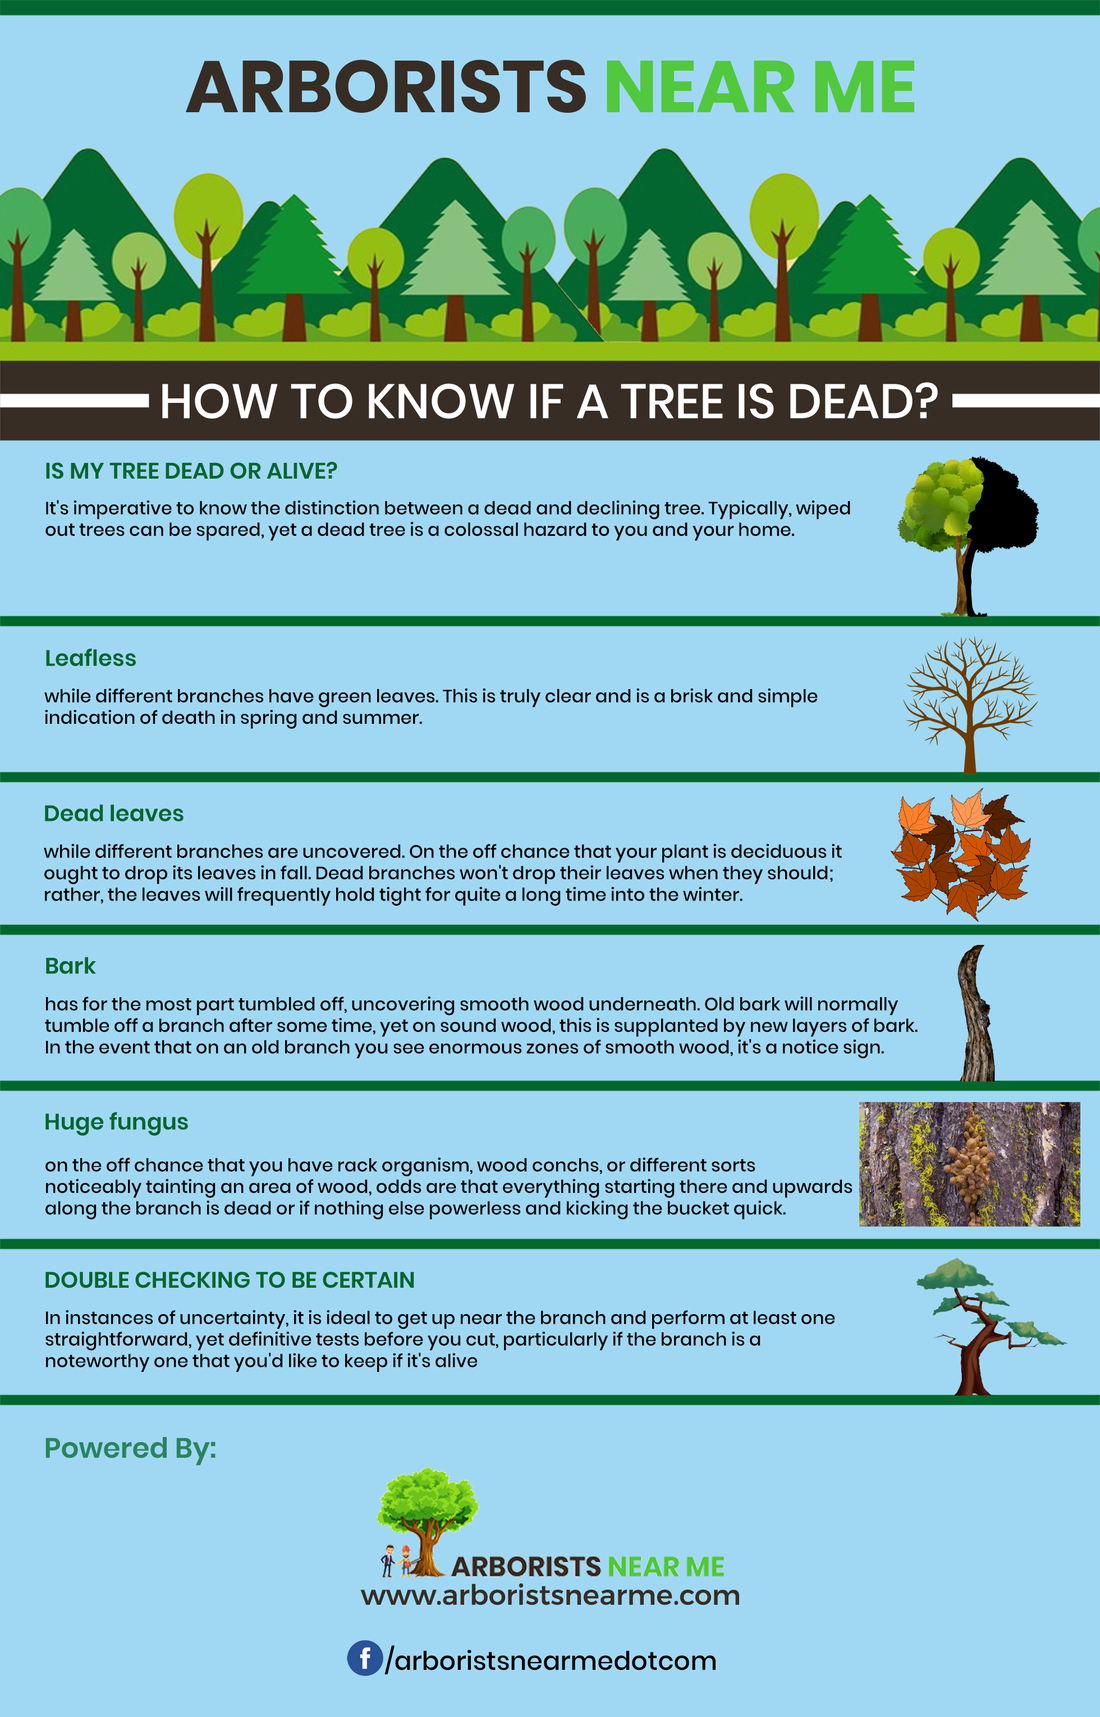 DISCOVER - How to know if a tree is dead